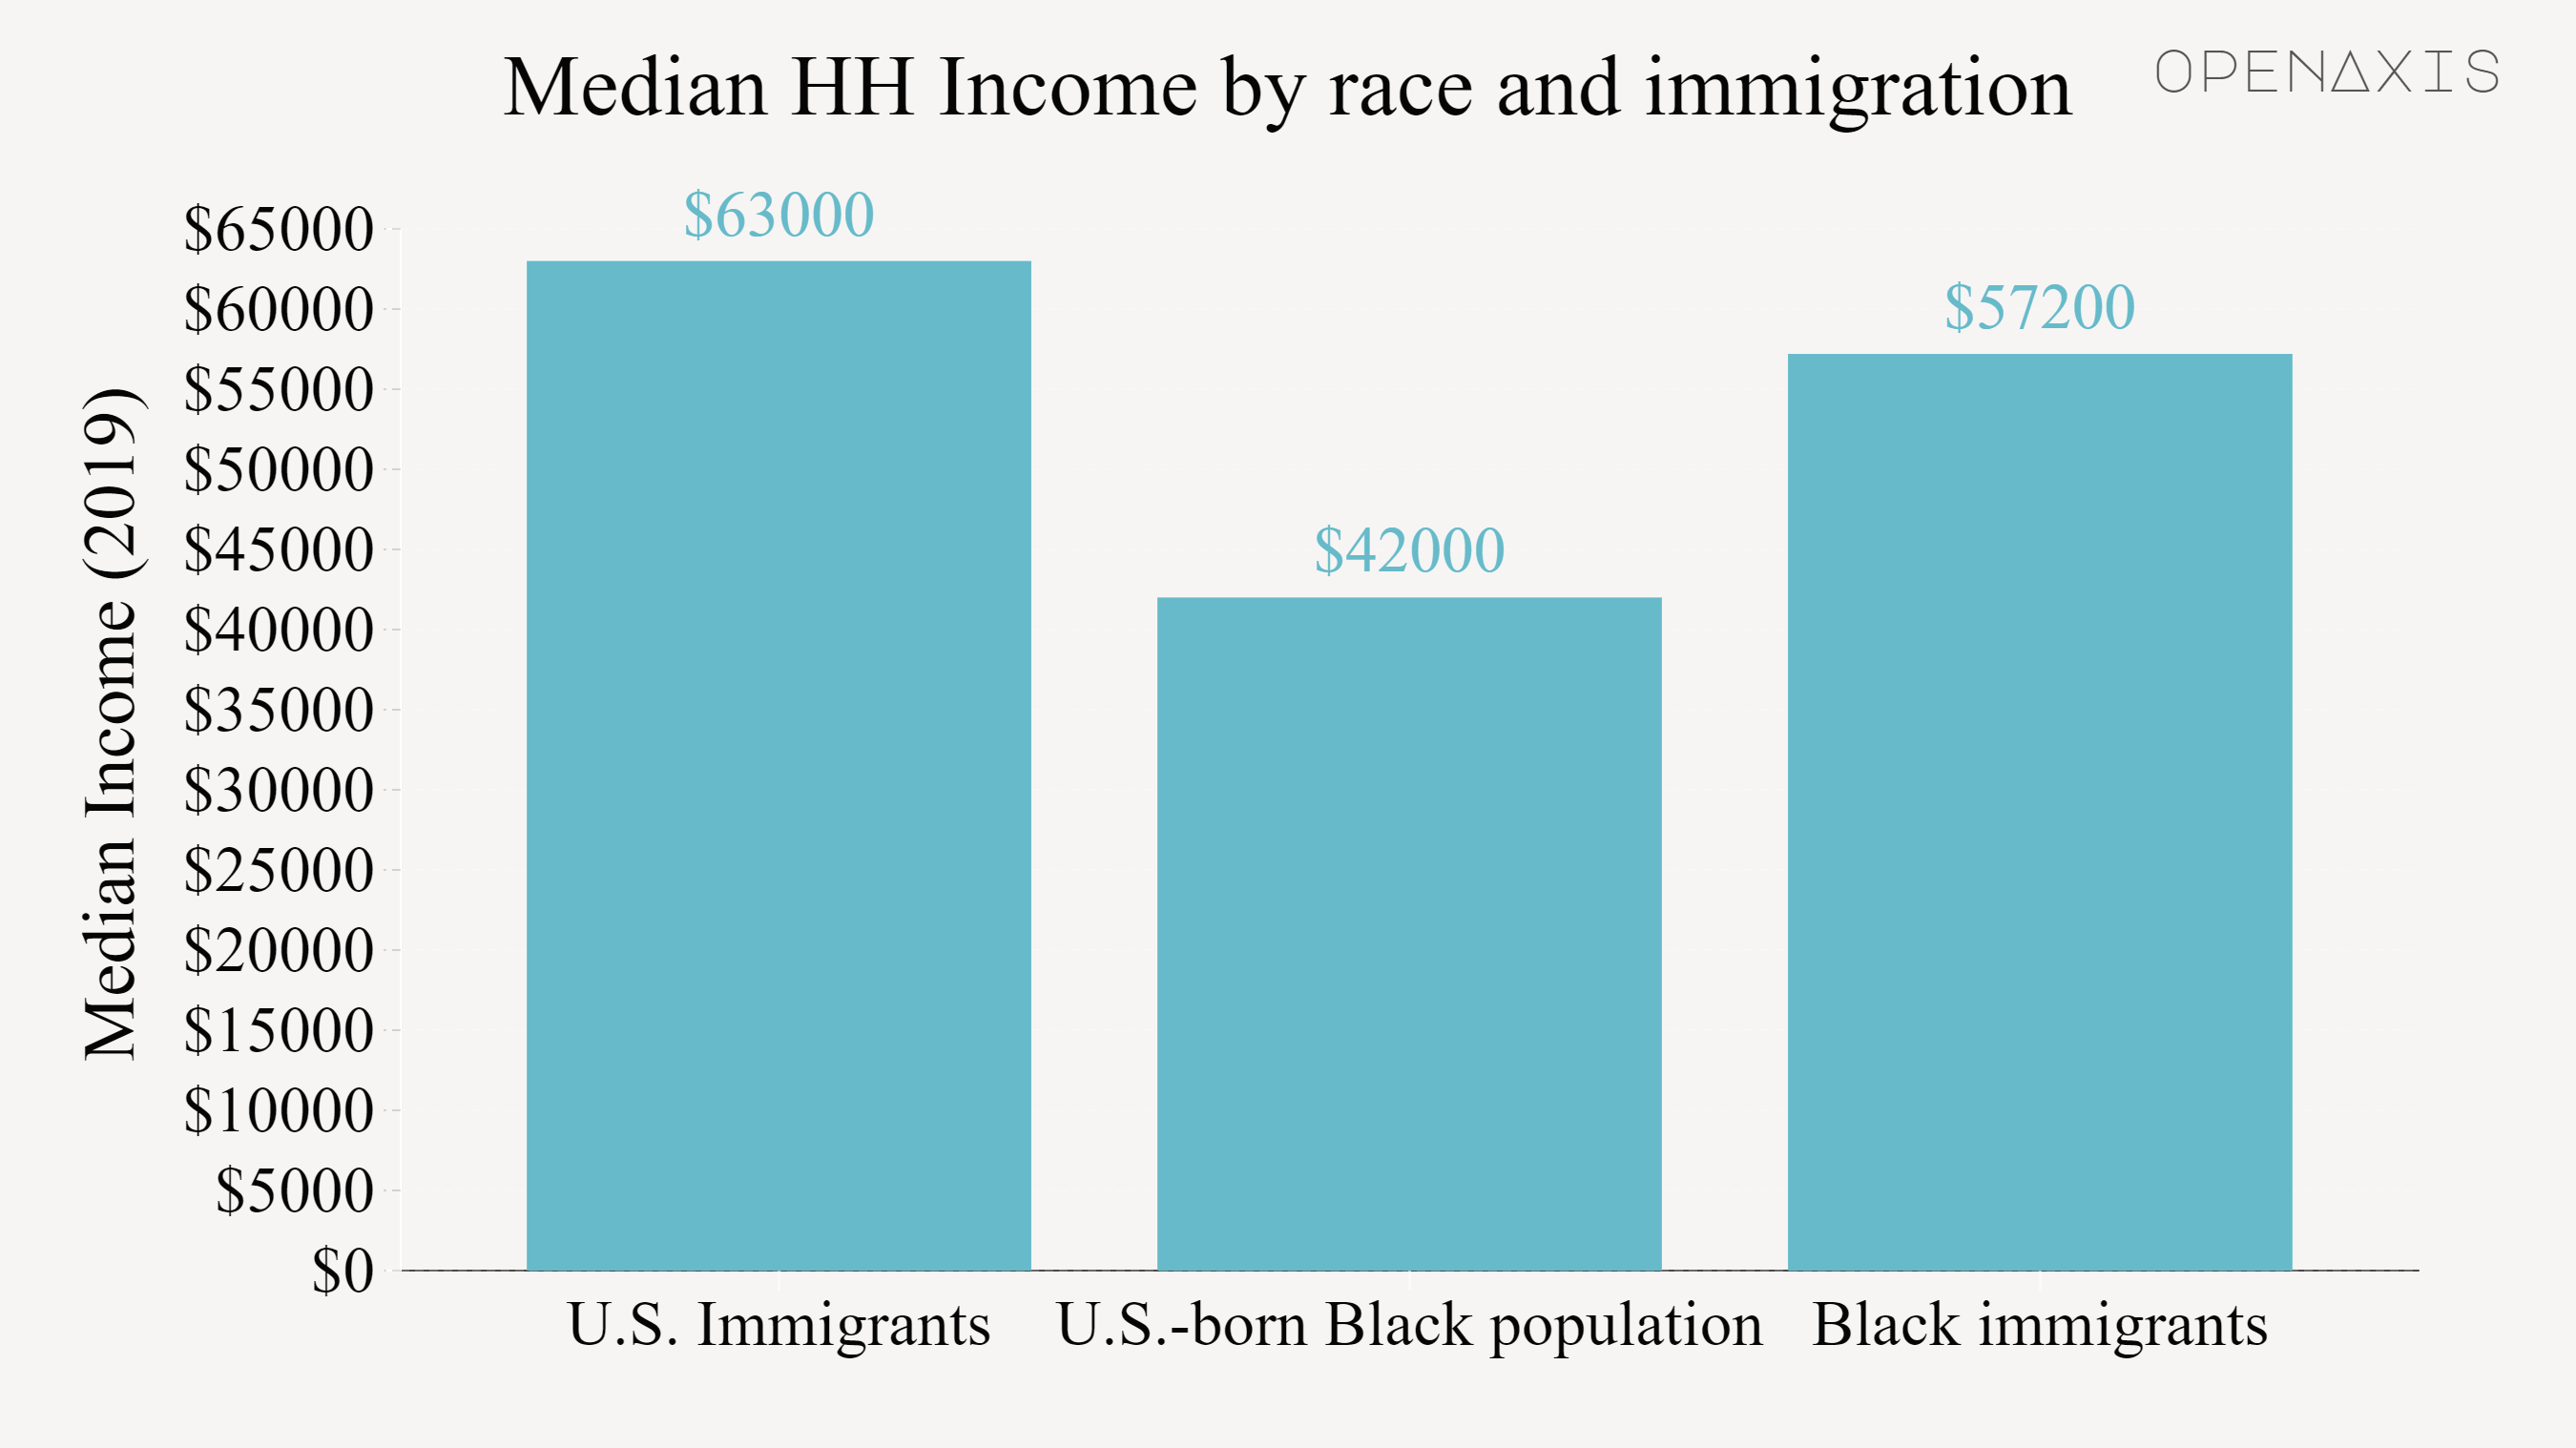 "Median HH Income by race and immigration"